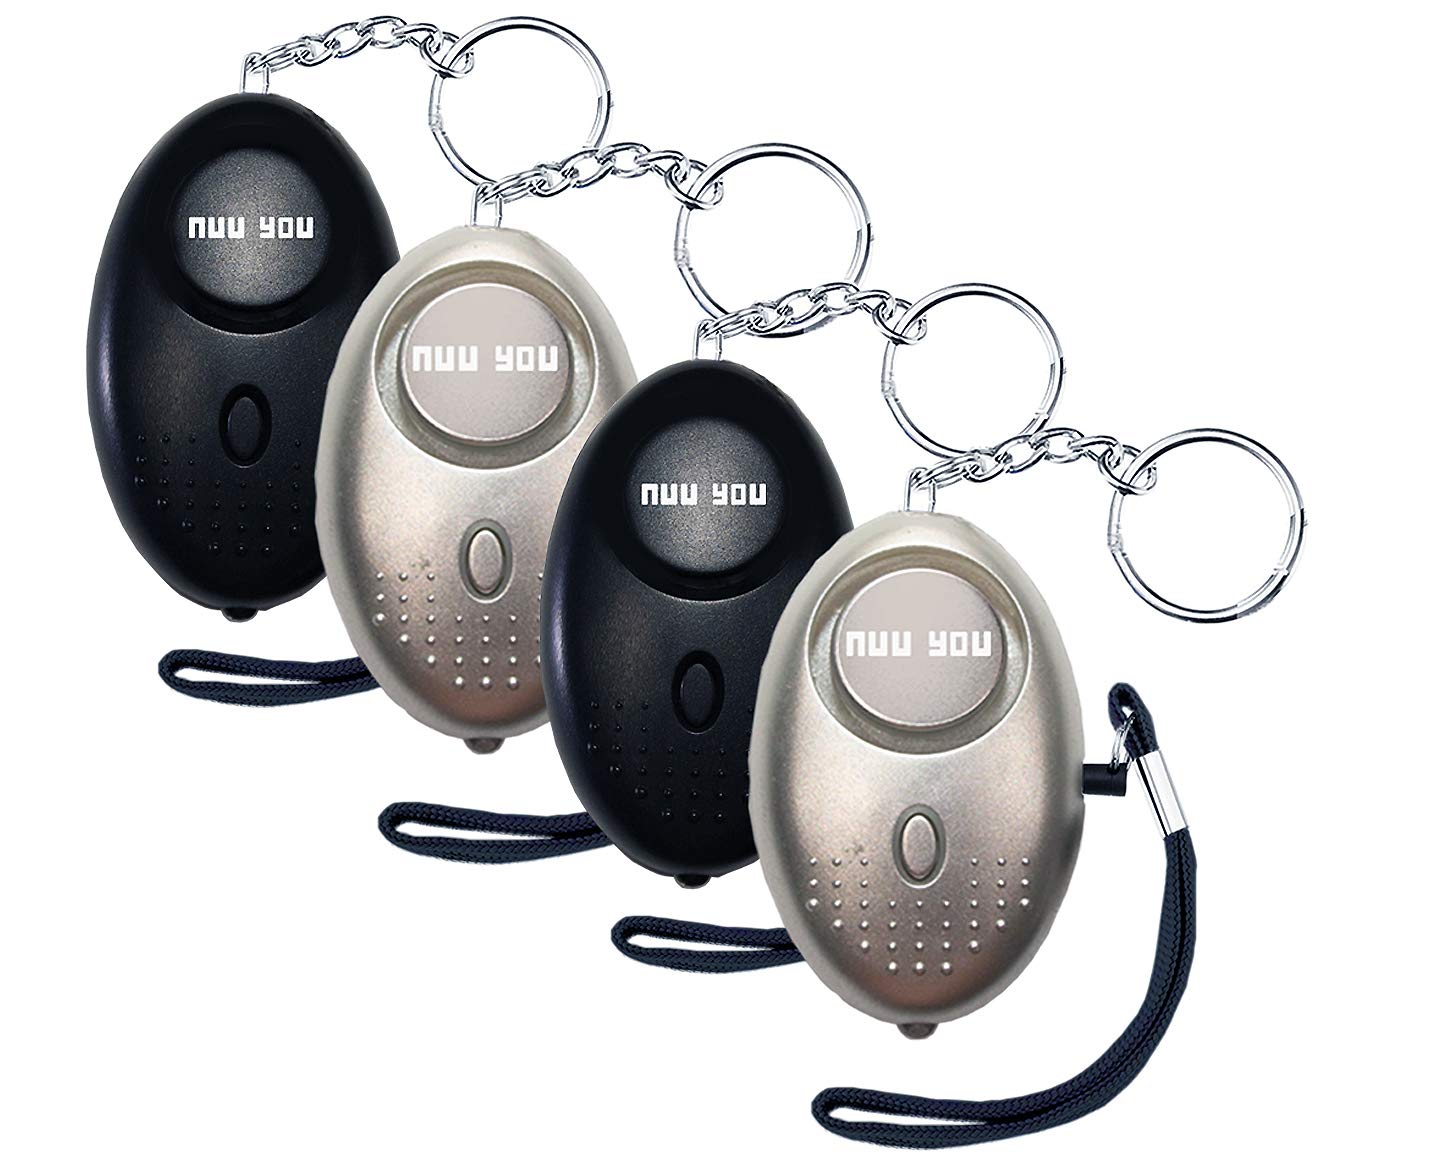 Qoosea 140DB Safe Sound Personal Alarm with LED Flashlight Self Defense Keychain Set for Kids Women Elderly Students Personal Alarms for Women Black/Silver/Purple 3 Pack